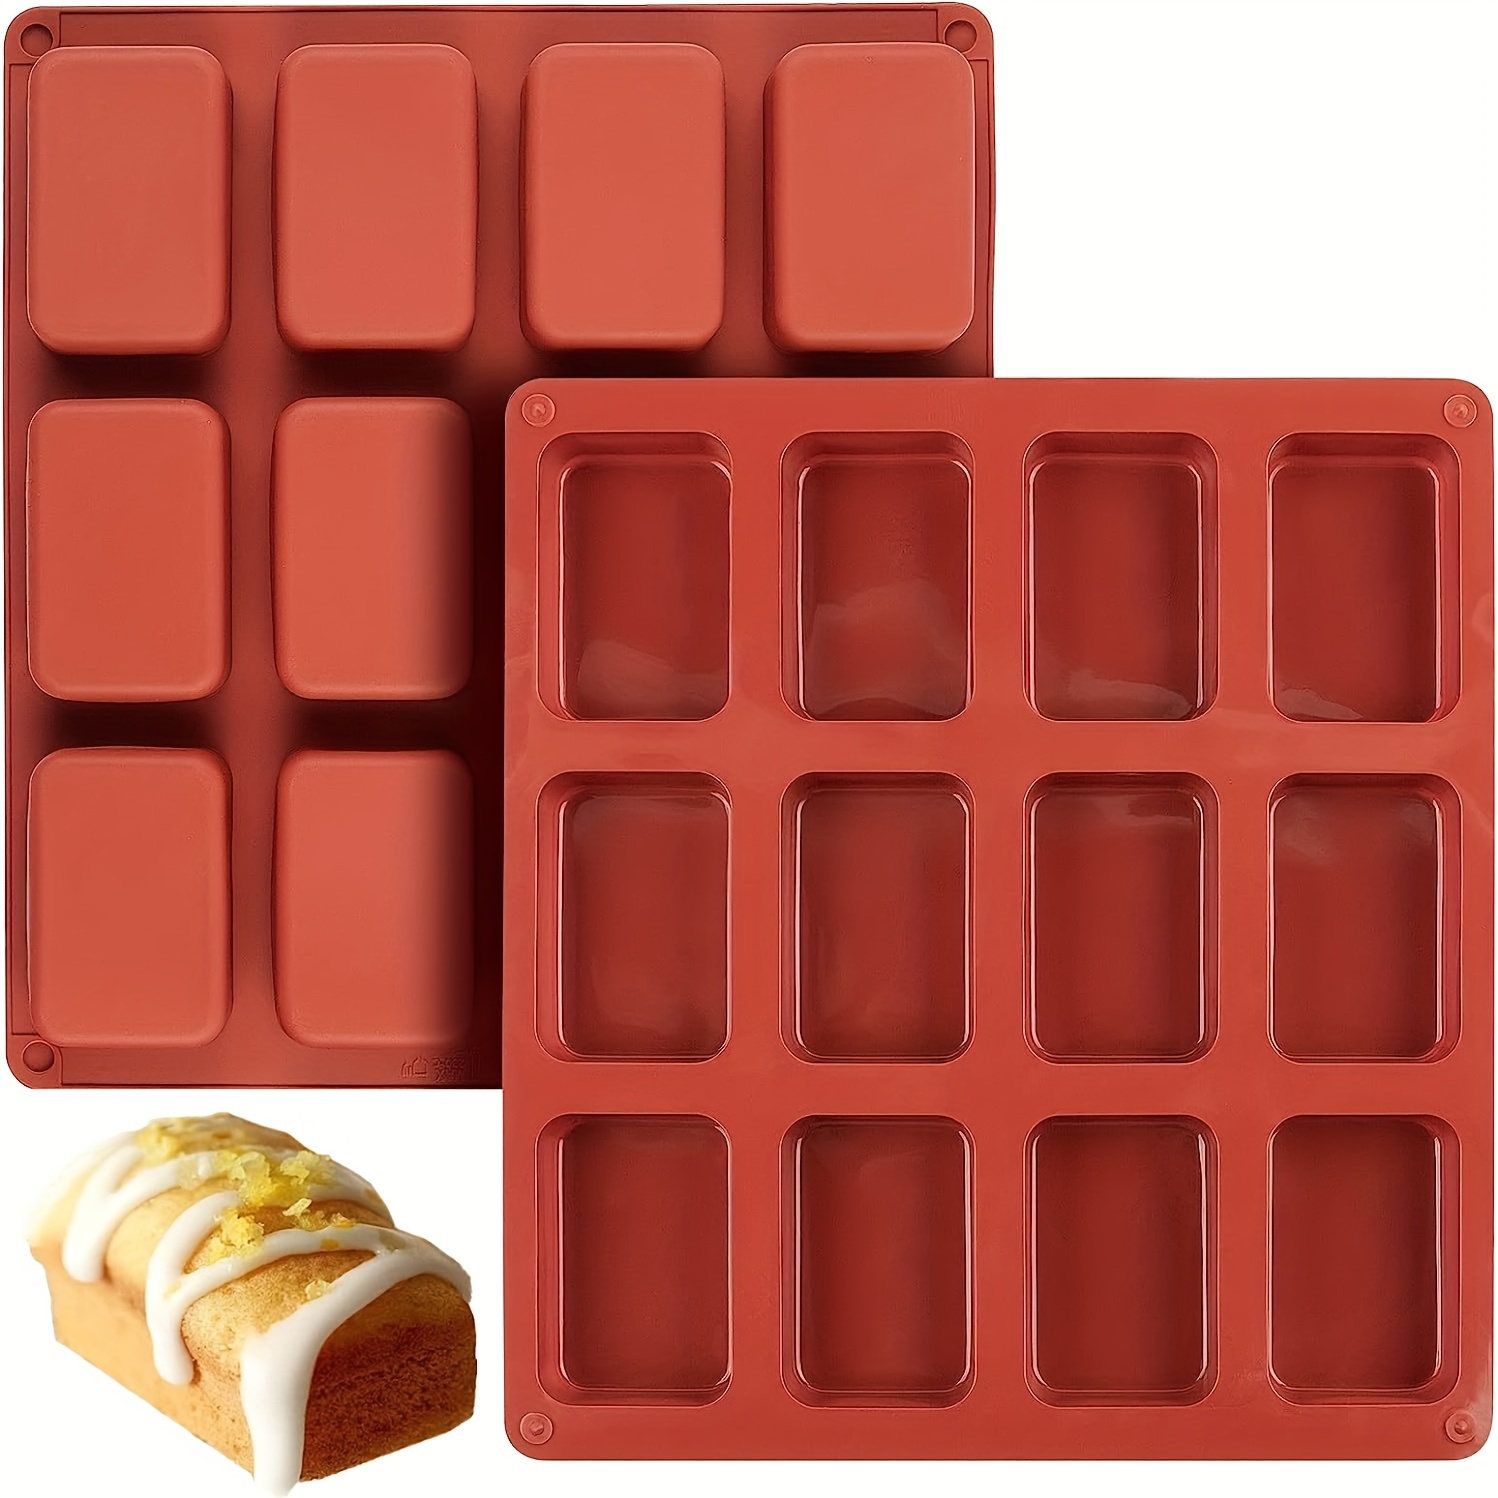 1pc 6-cavity Rectangular Silicone Mold For Baking Cake, Making Handmade Soap,  Aroma, Chocolate, Cookie And Cereal Bar